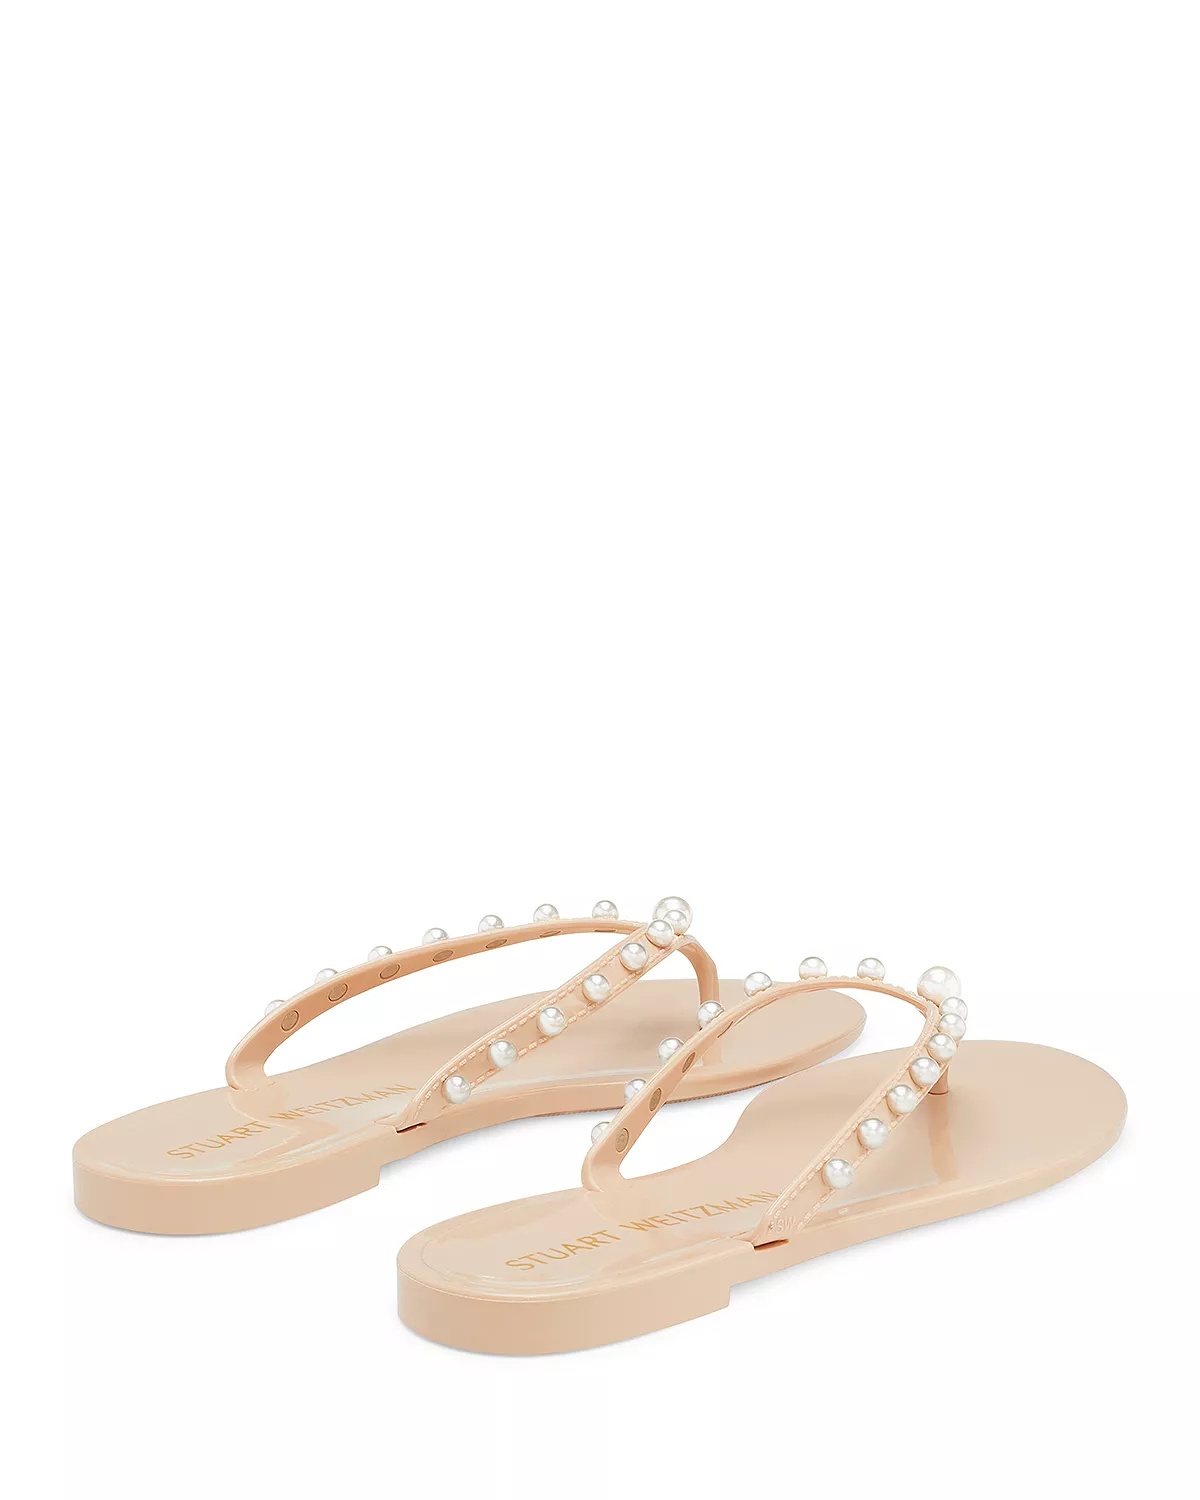 Women's Goldie Embellished Jelly Flip Flop Thong Sandals - 4